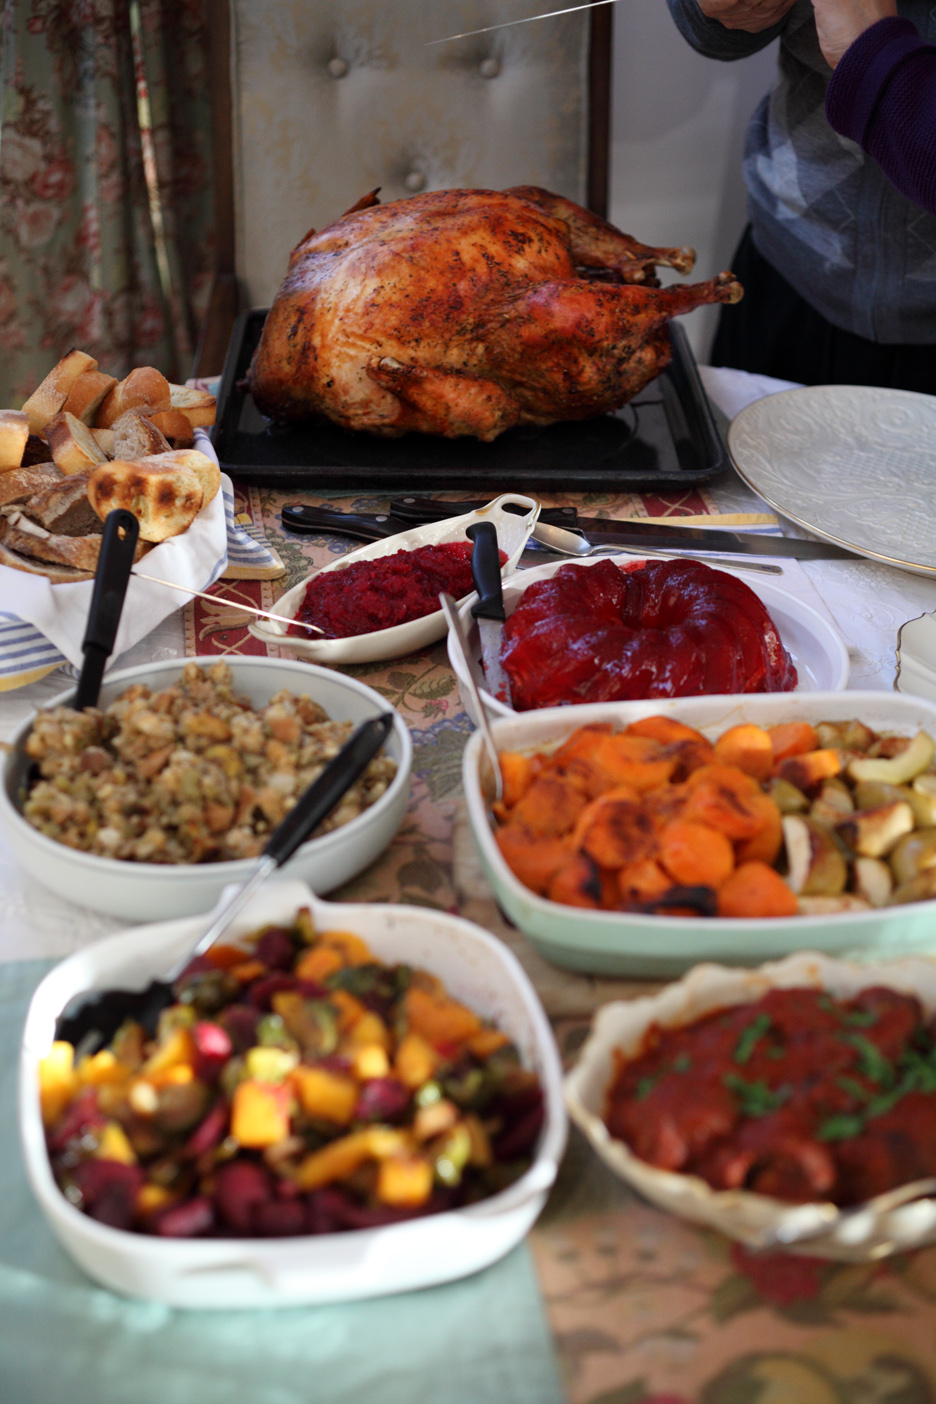 A typical Thanksgiving feast. Image courtesy of ccho. 